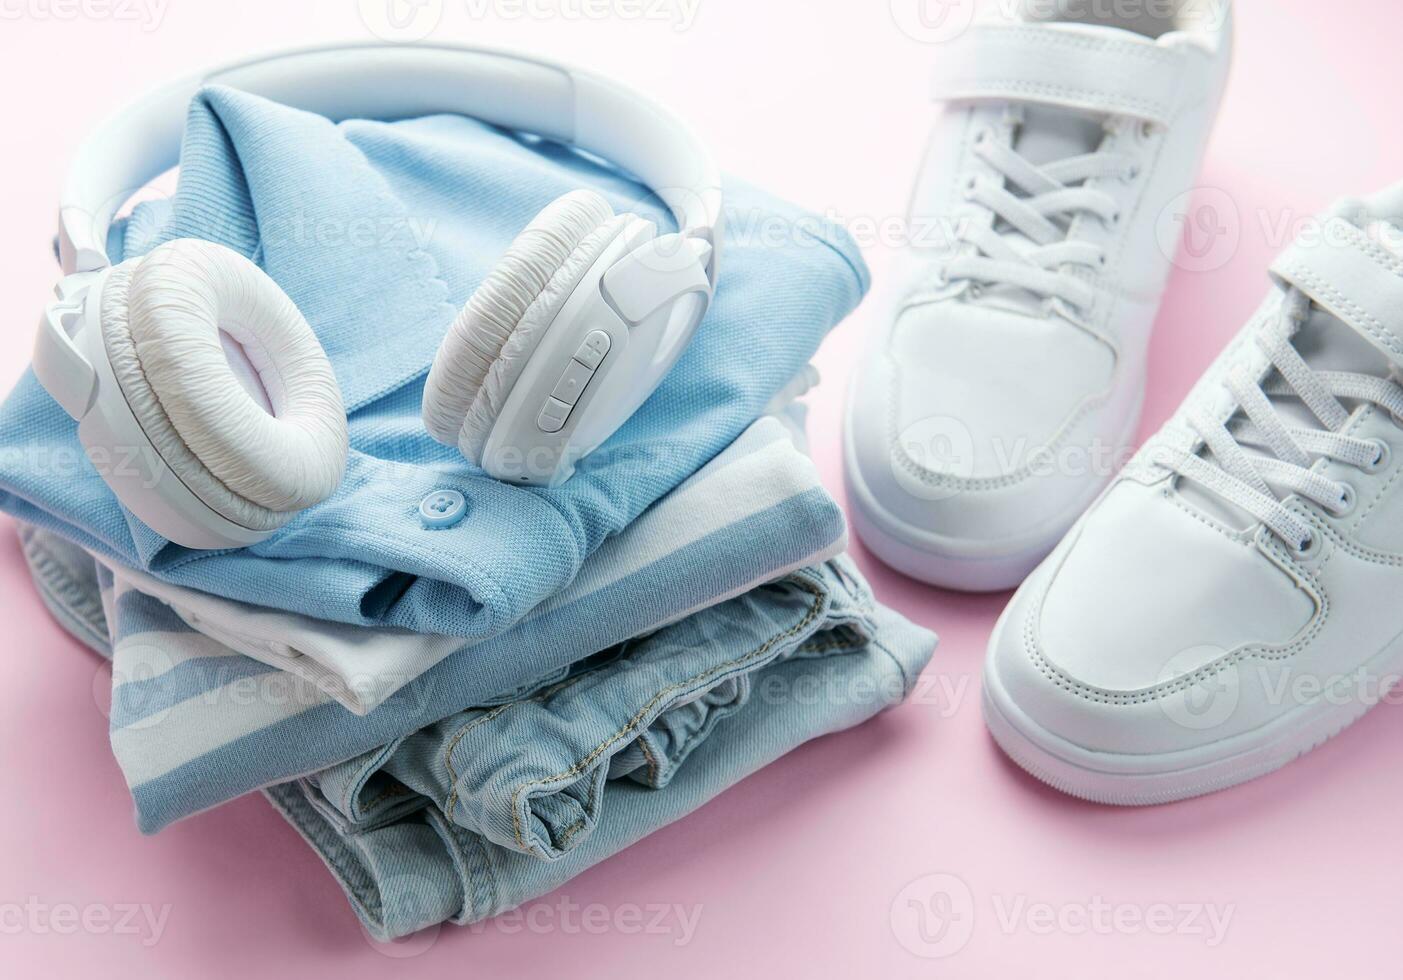 Child's t-shirt, shoes and headphones on pink backgrund photo